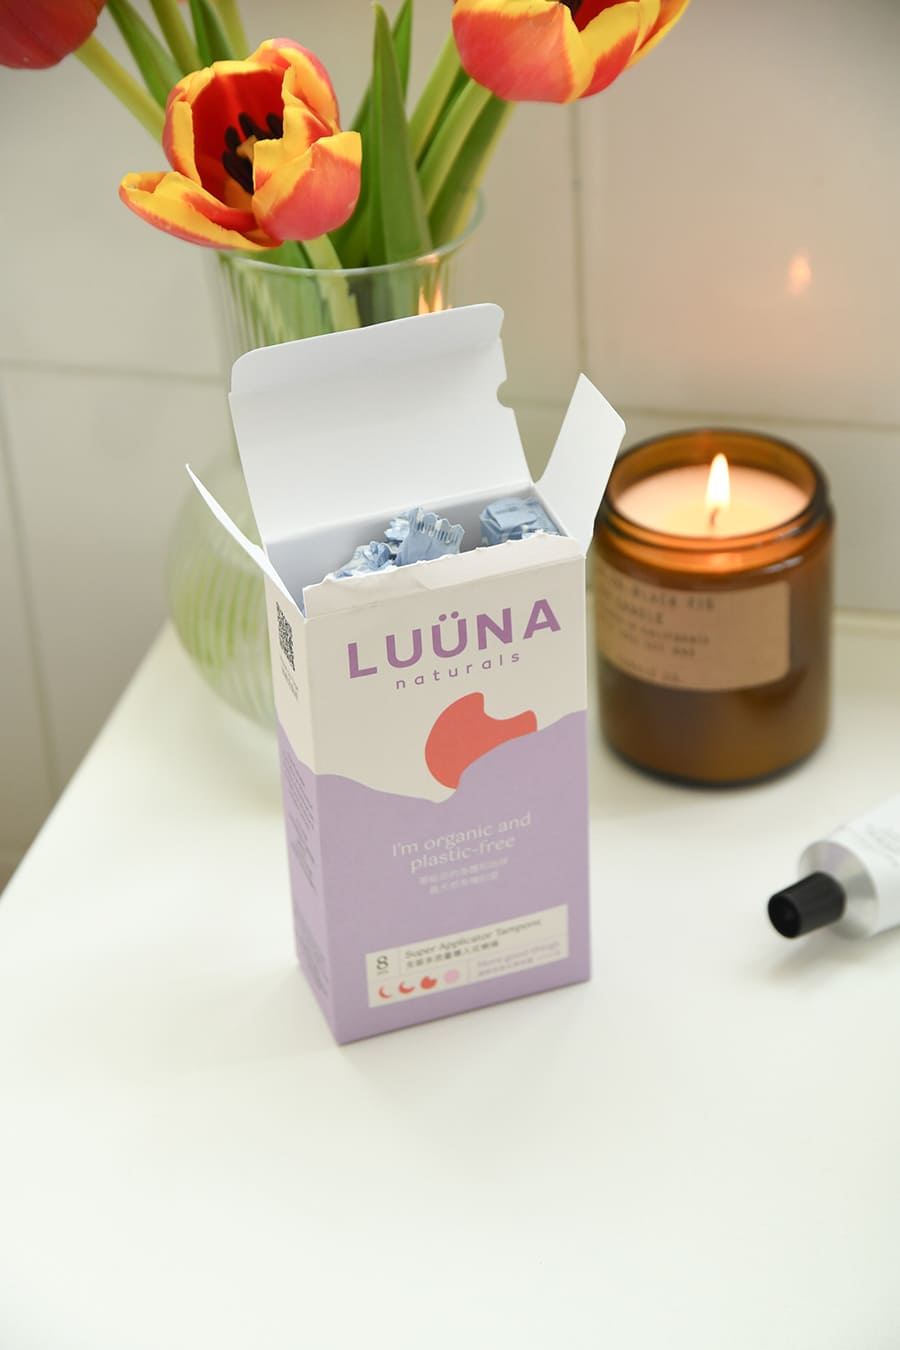 Open box of period products next to candle and flowers